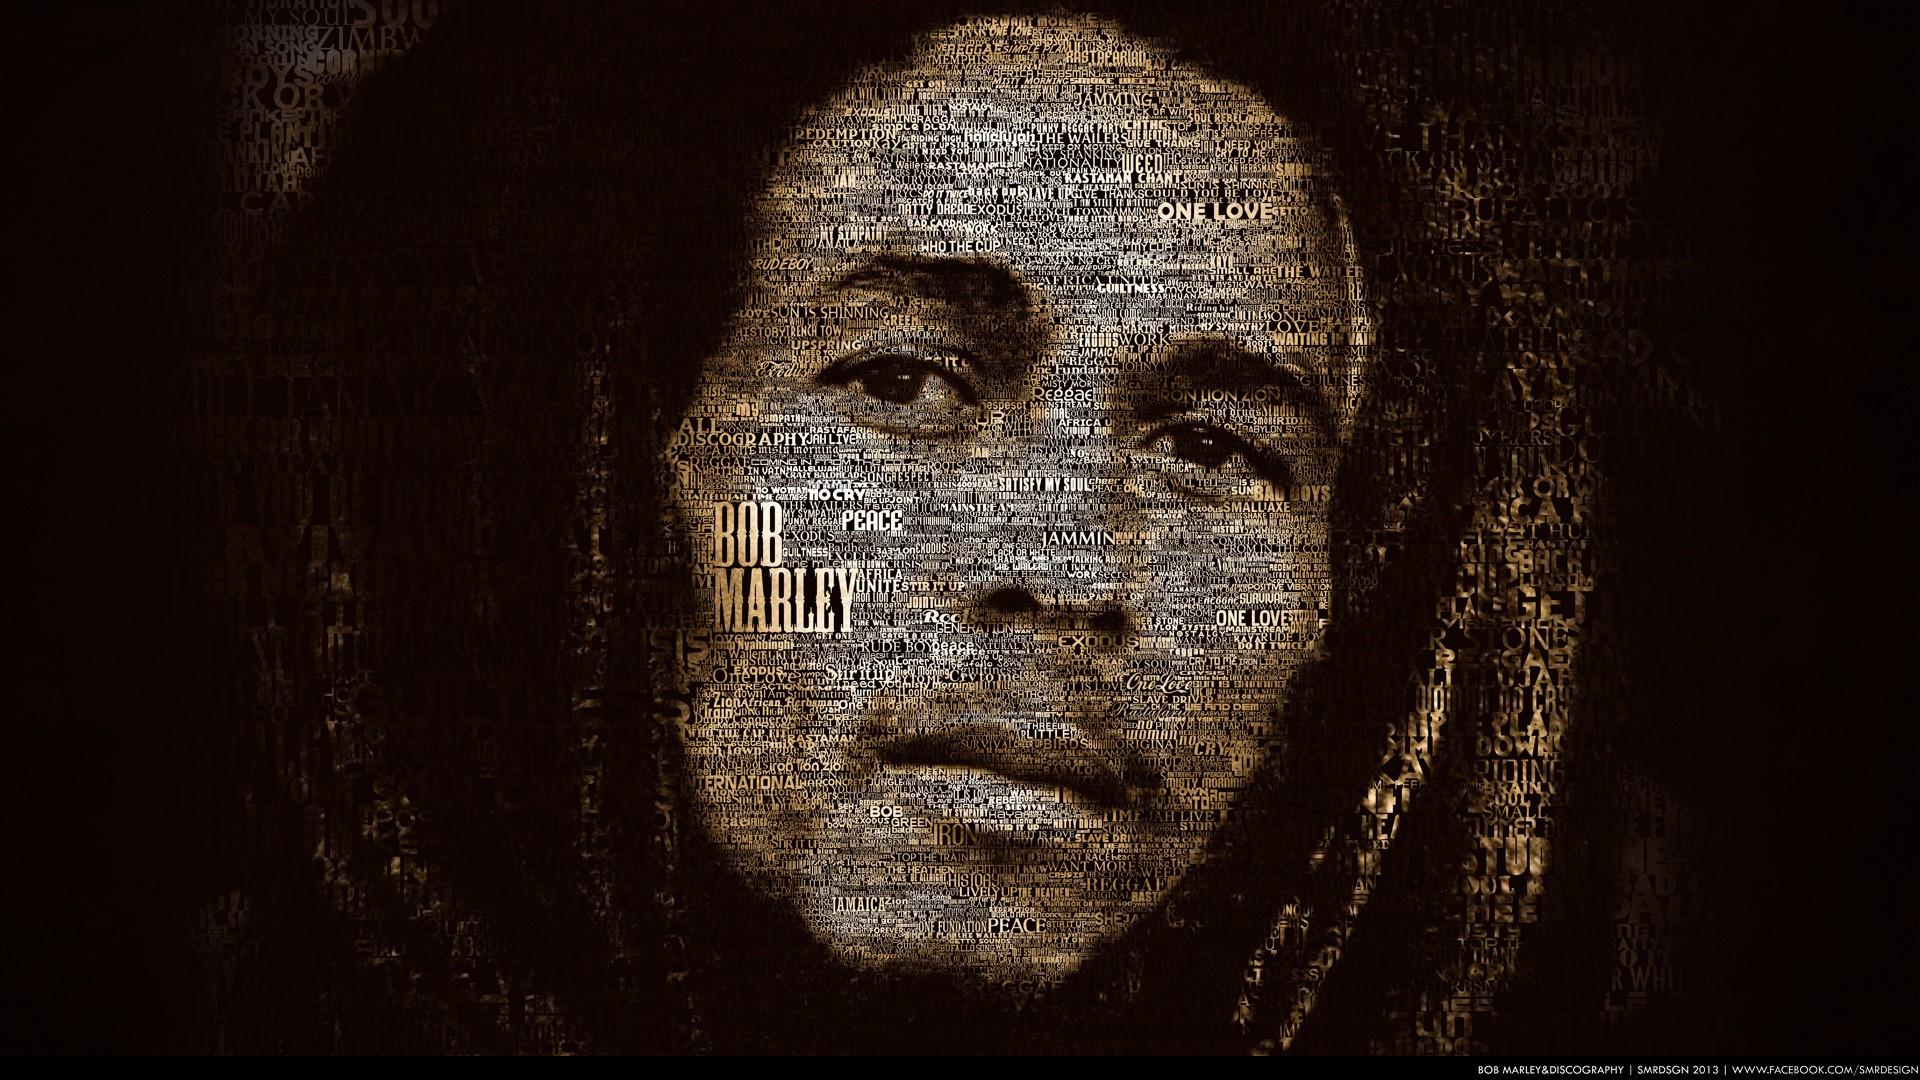 Bob Marley Discography Typography HD Wallpaper Famous Singer